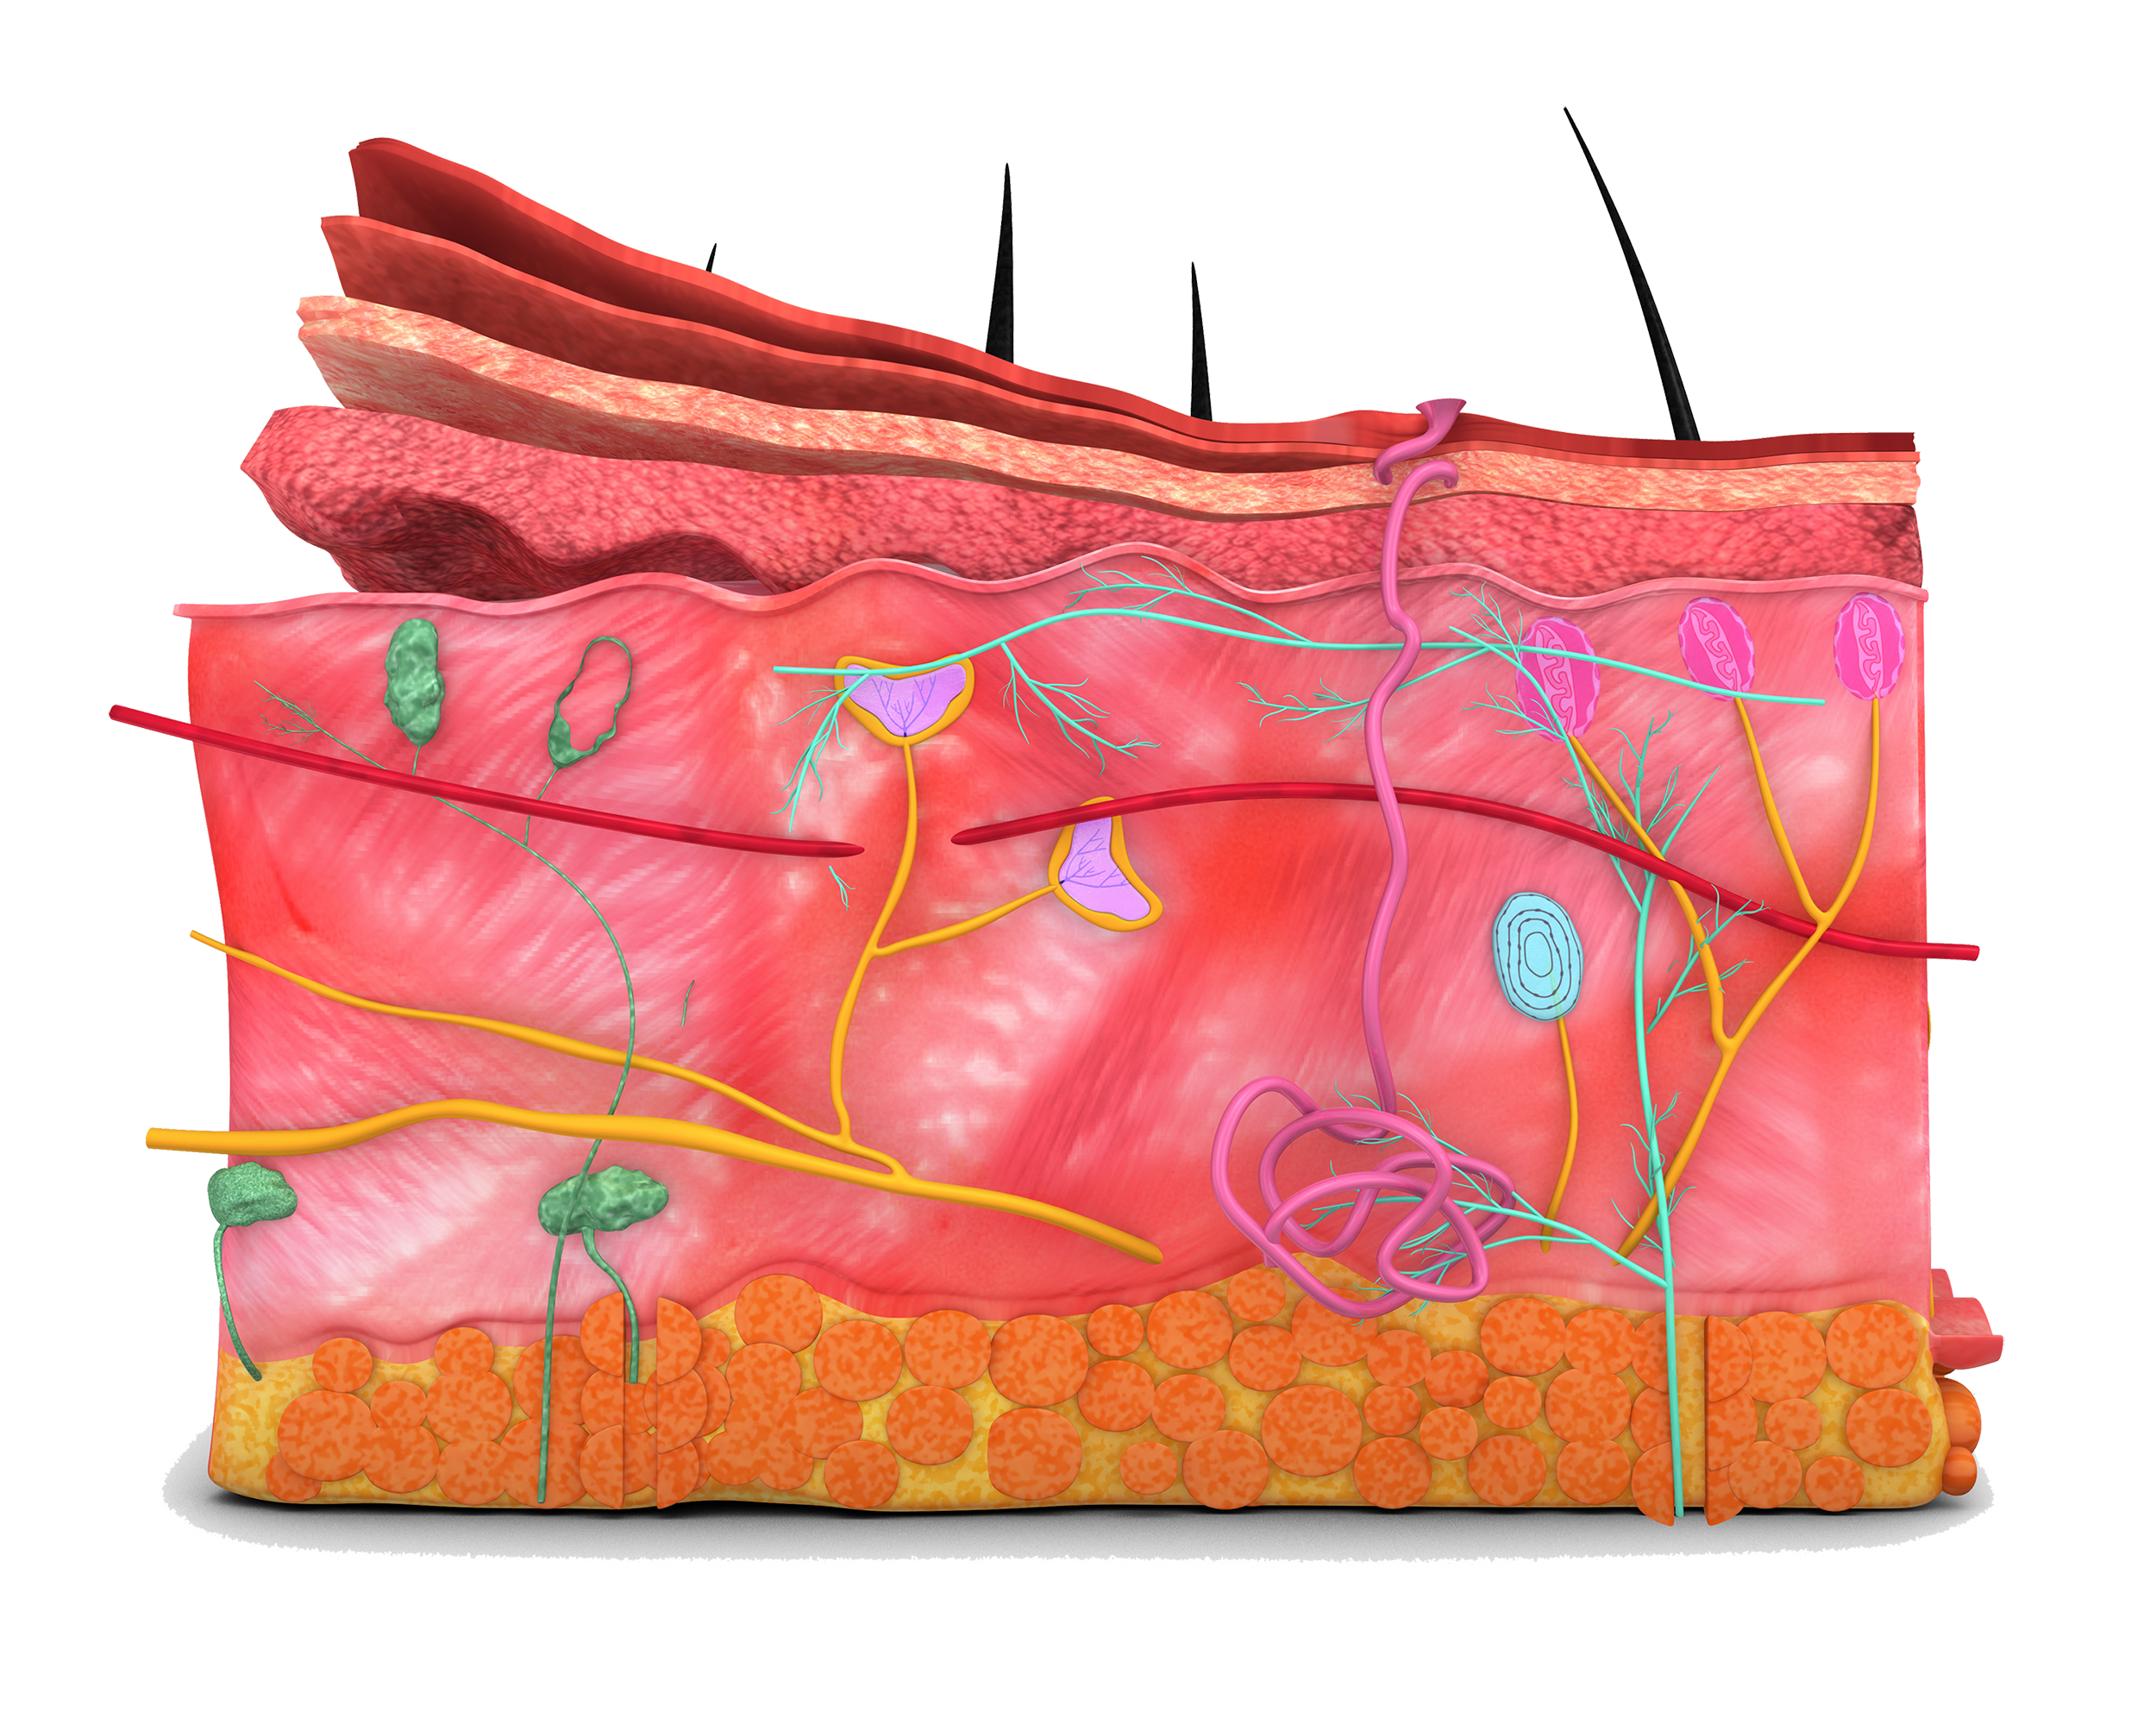 animated image of the layers of skin